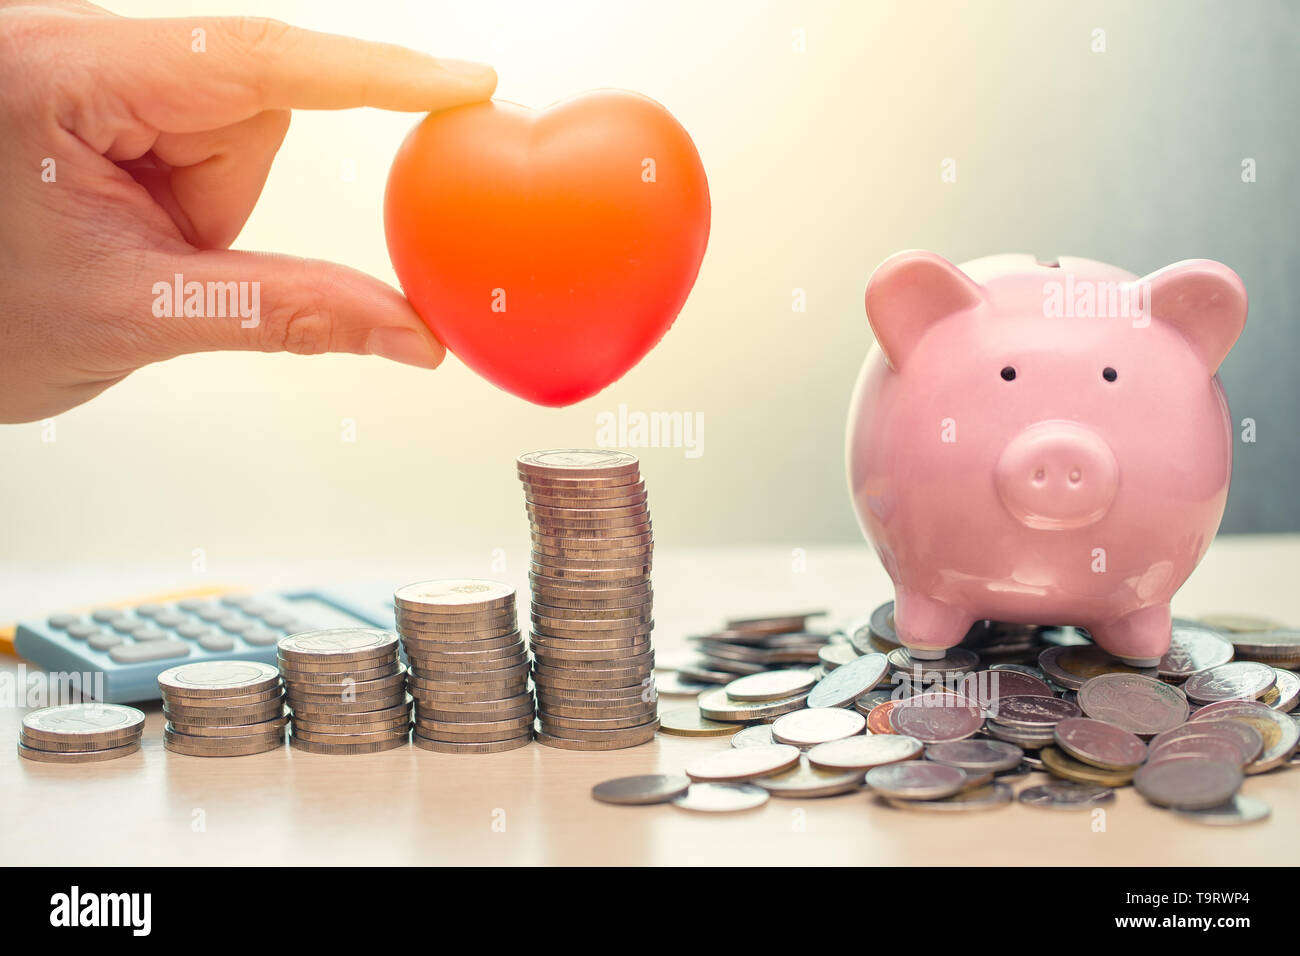 Love Heart and Saving Money Piggy Bank for Life insurance Share or Donation concept. Stock Photo